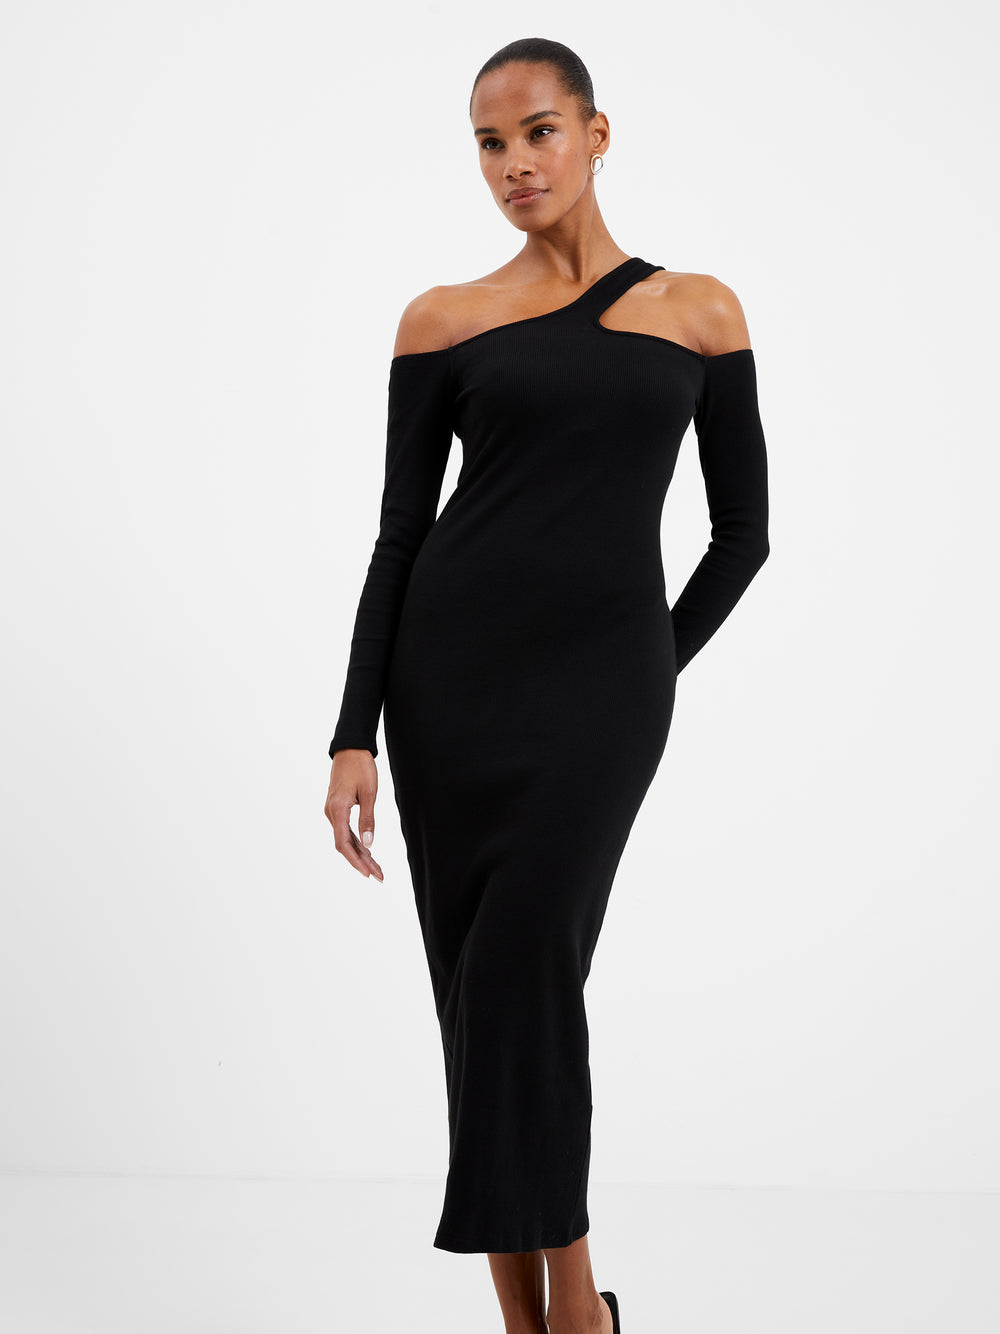 Rassia Cheryle Ribbed Cut-Out Midi Dress Black | French Connection UK